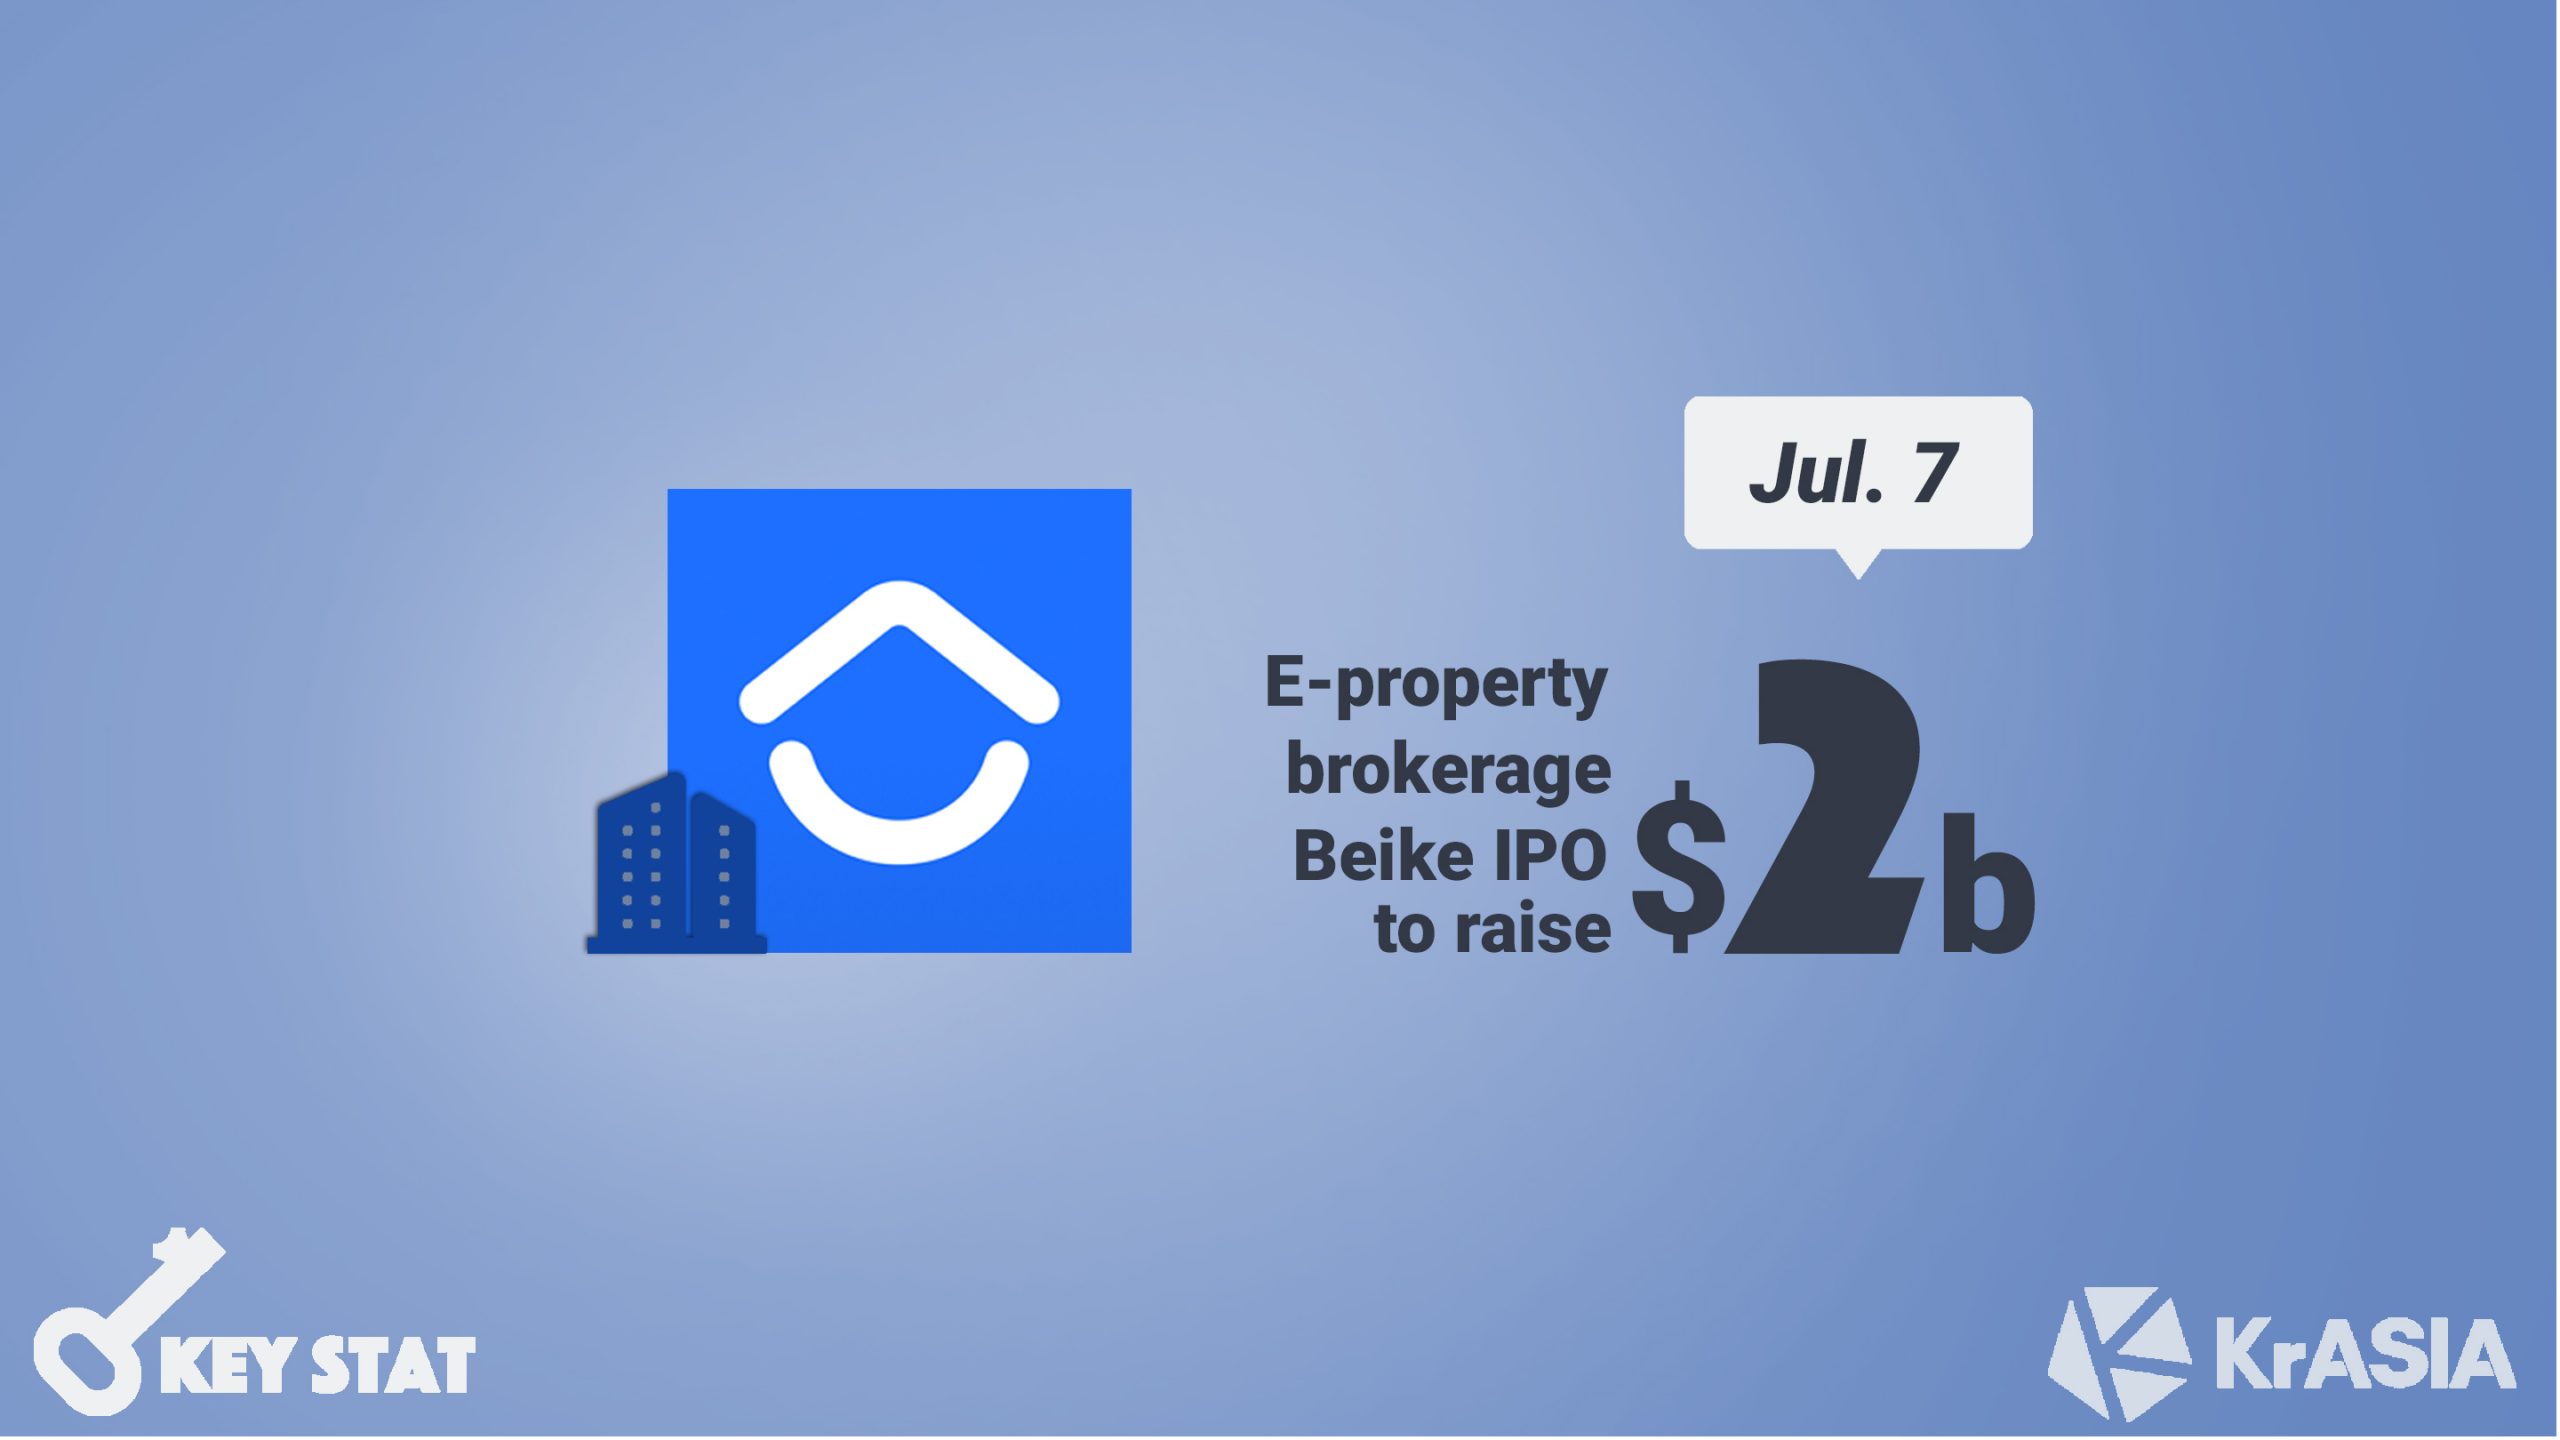 KEY STAT | Tencent-backed real estate firm Beike to file IPO in the US